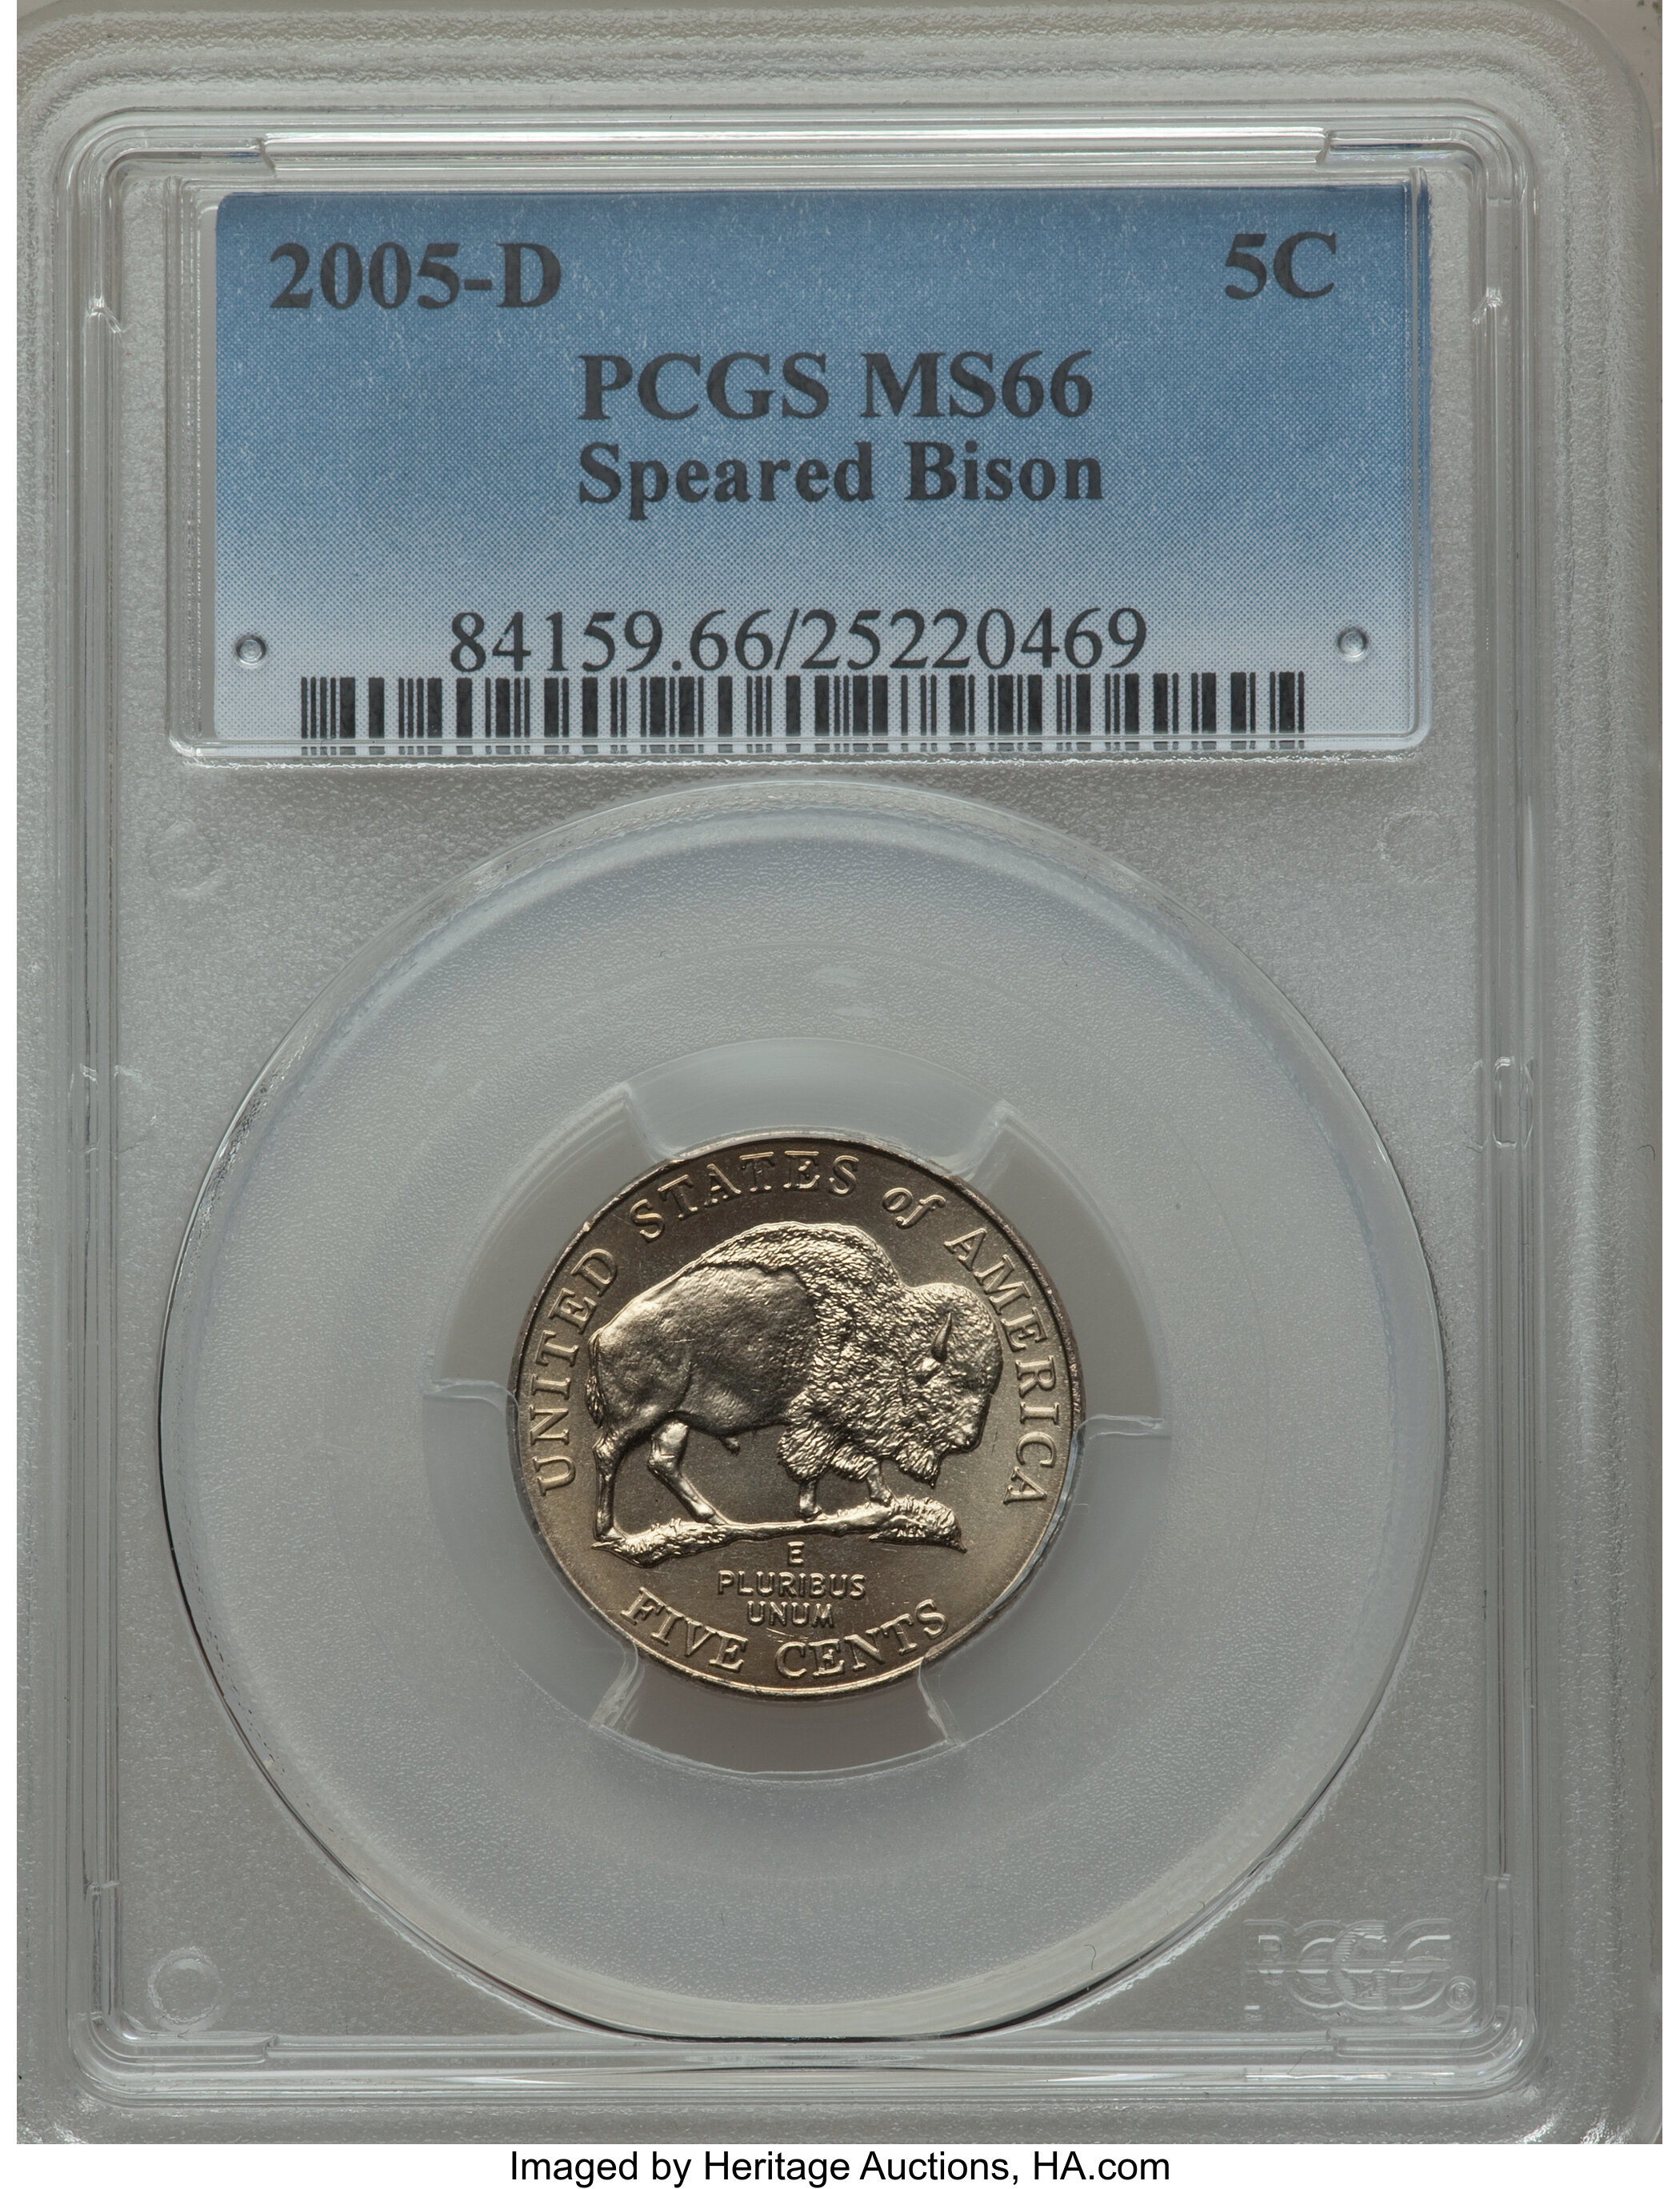 2005-D 5C Speared Bison MS66 PCGS. Jefferson Nickels | Lot #3752